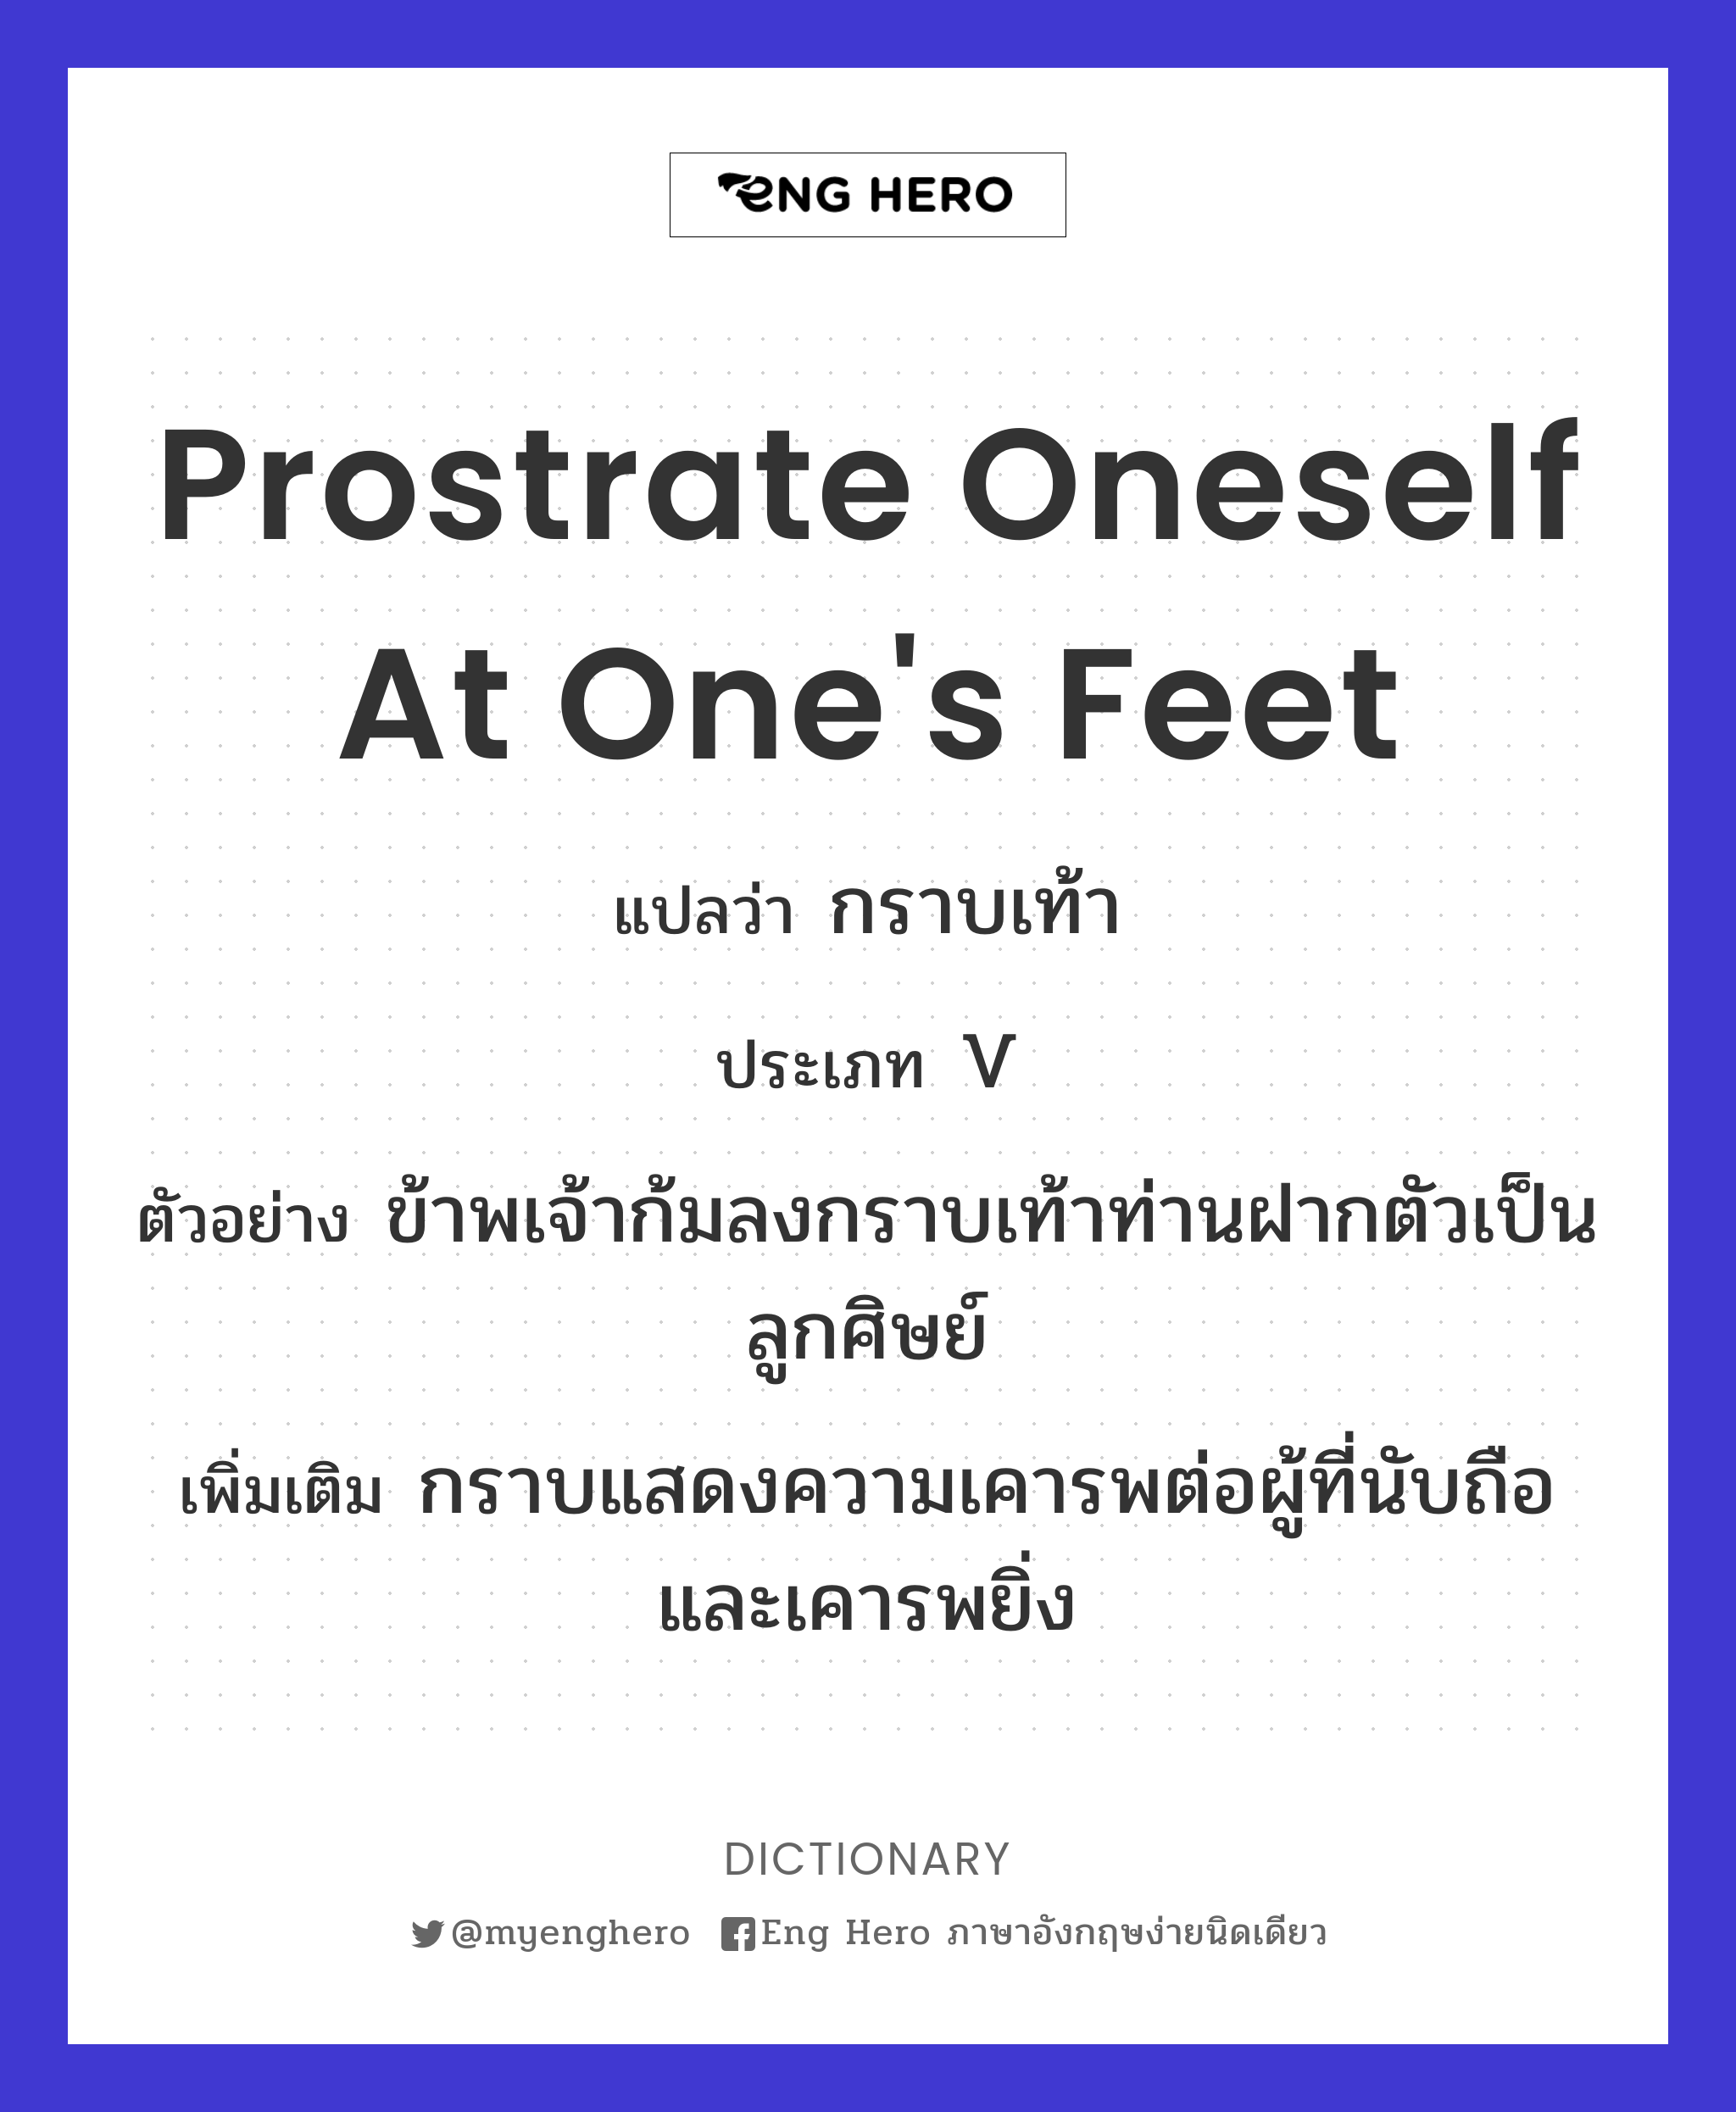 prostrate oneself at one's feet